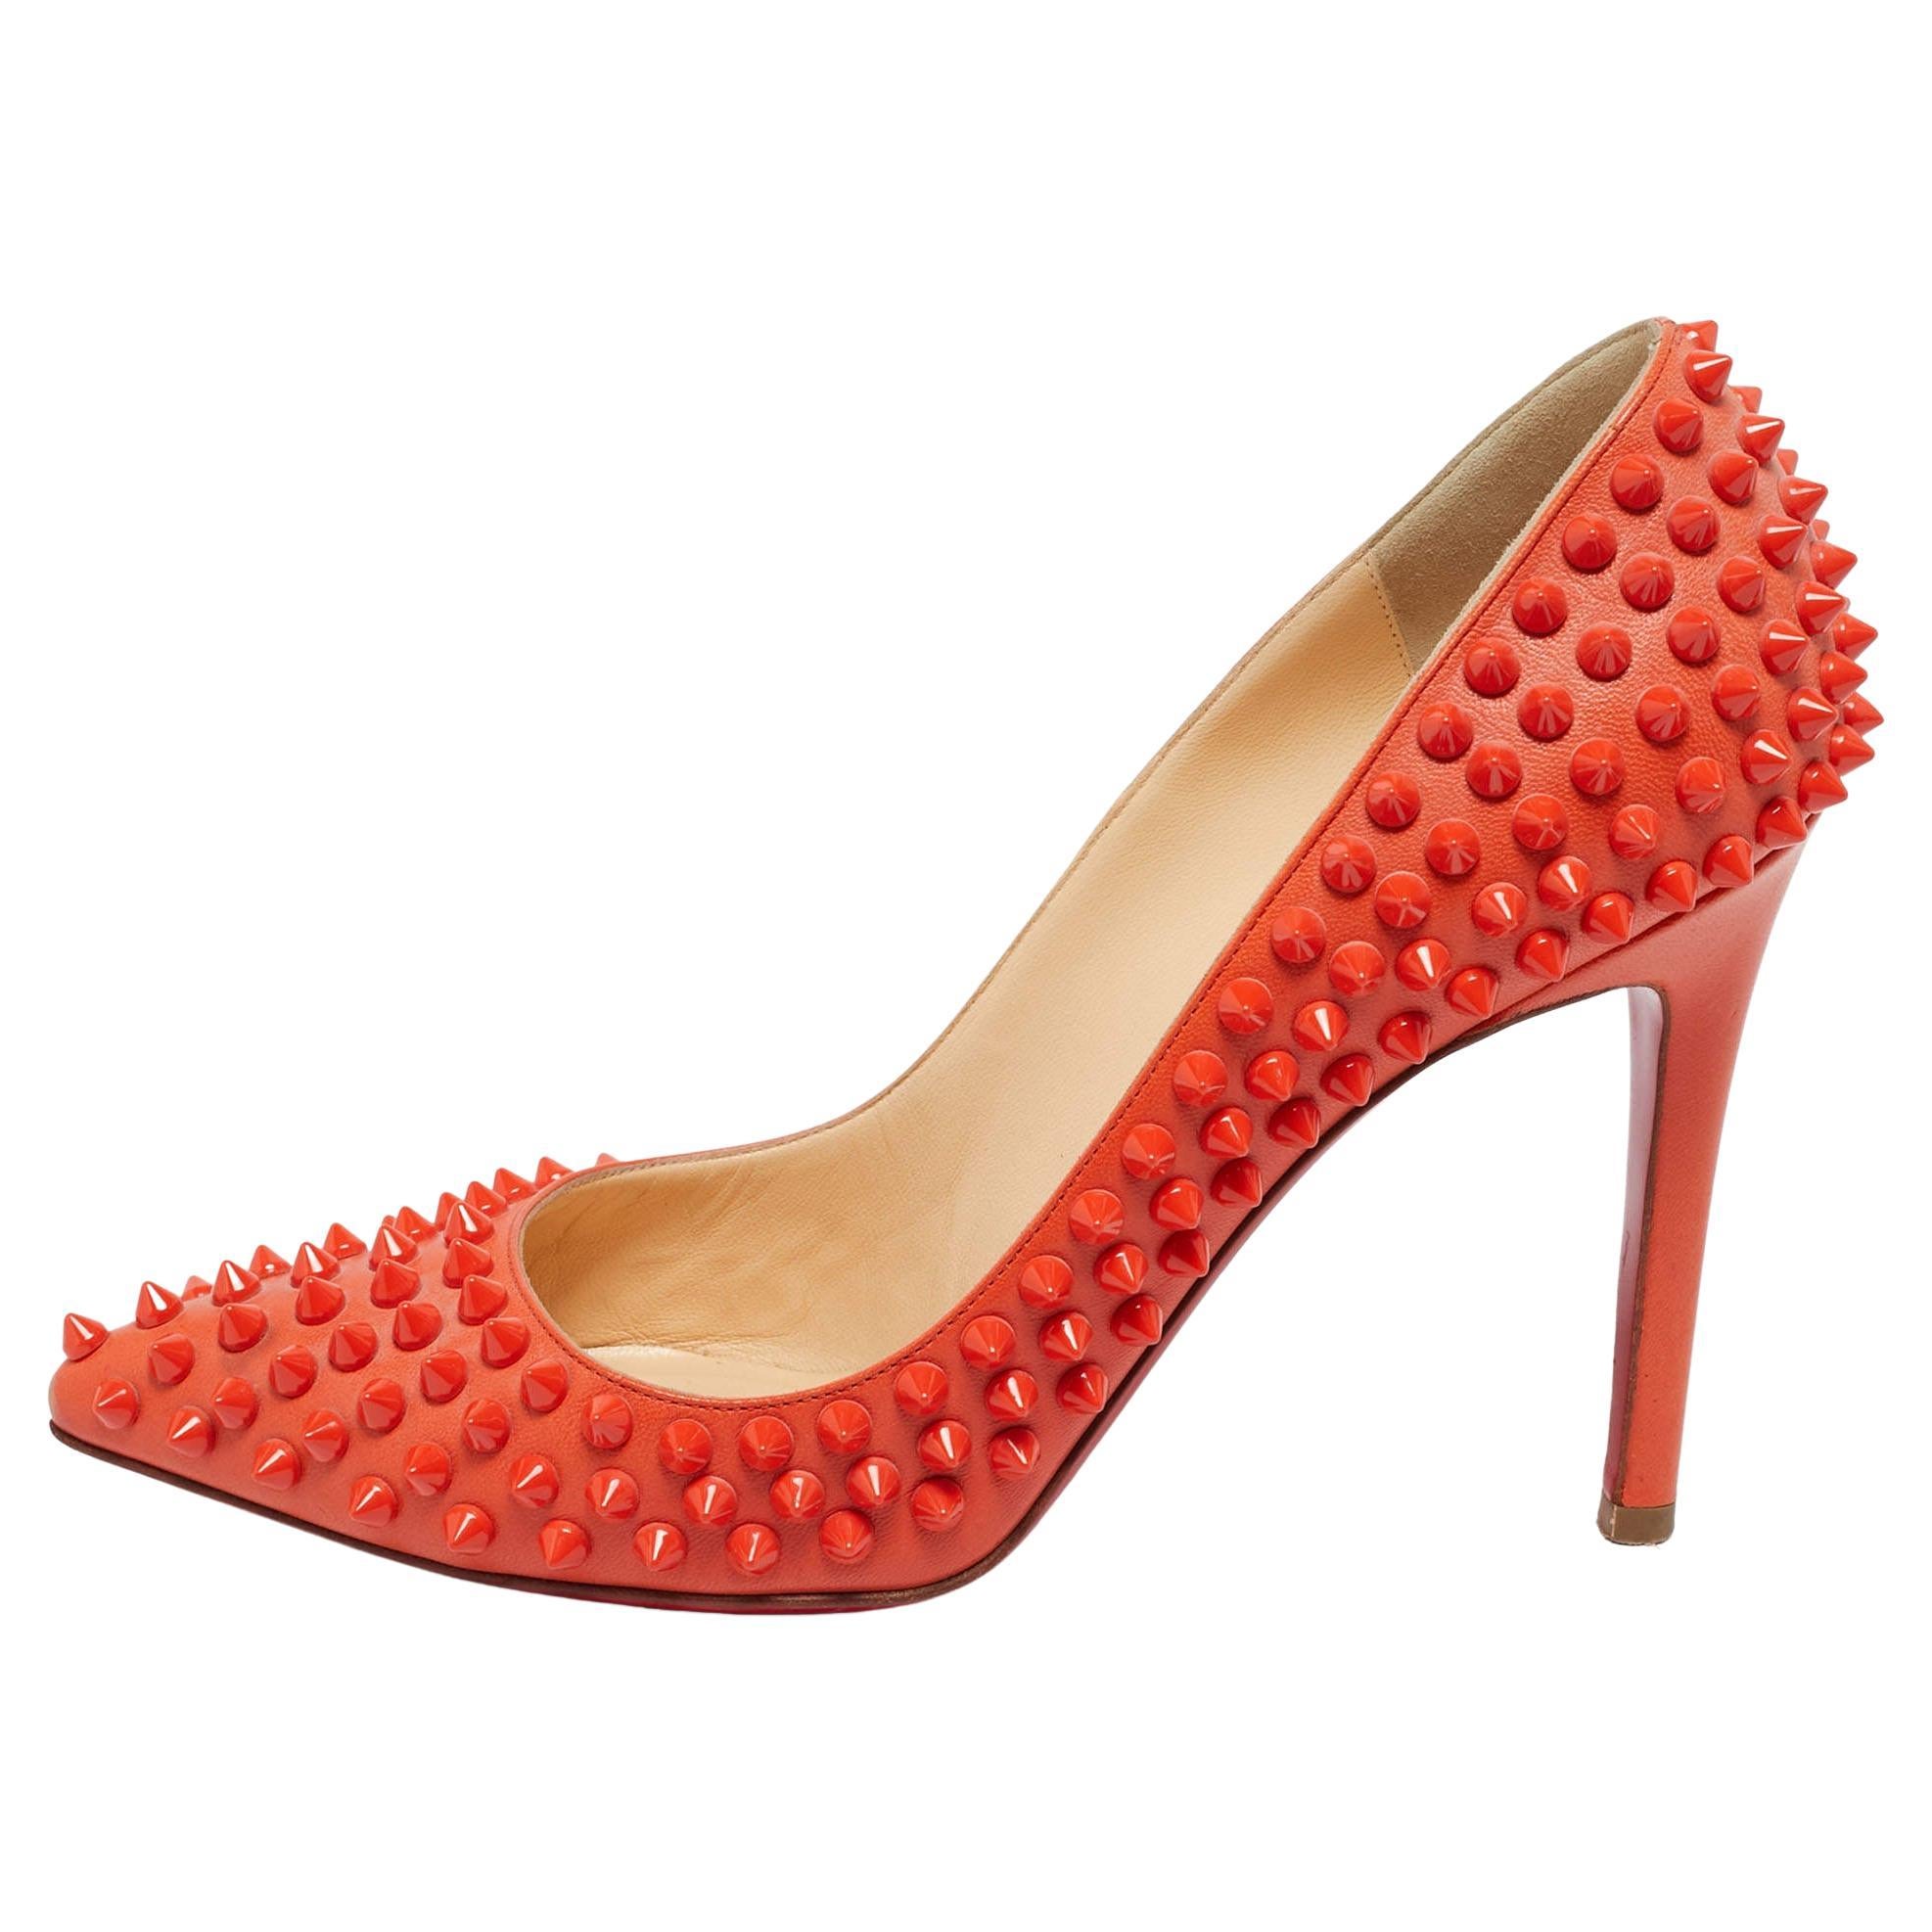 Christian Louboutin Orange Leather Pigalle Spikes Pumps Size 37.5